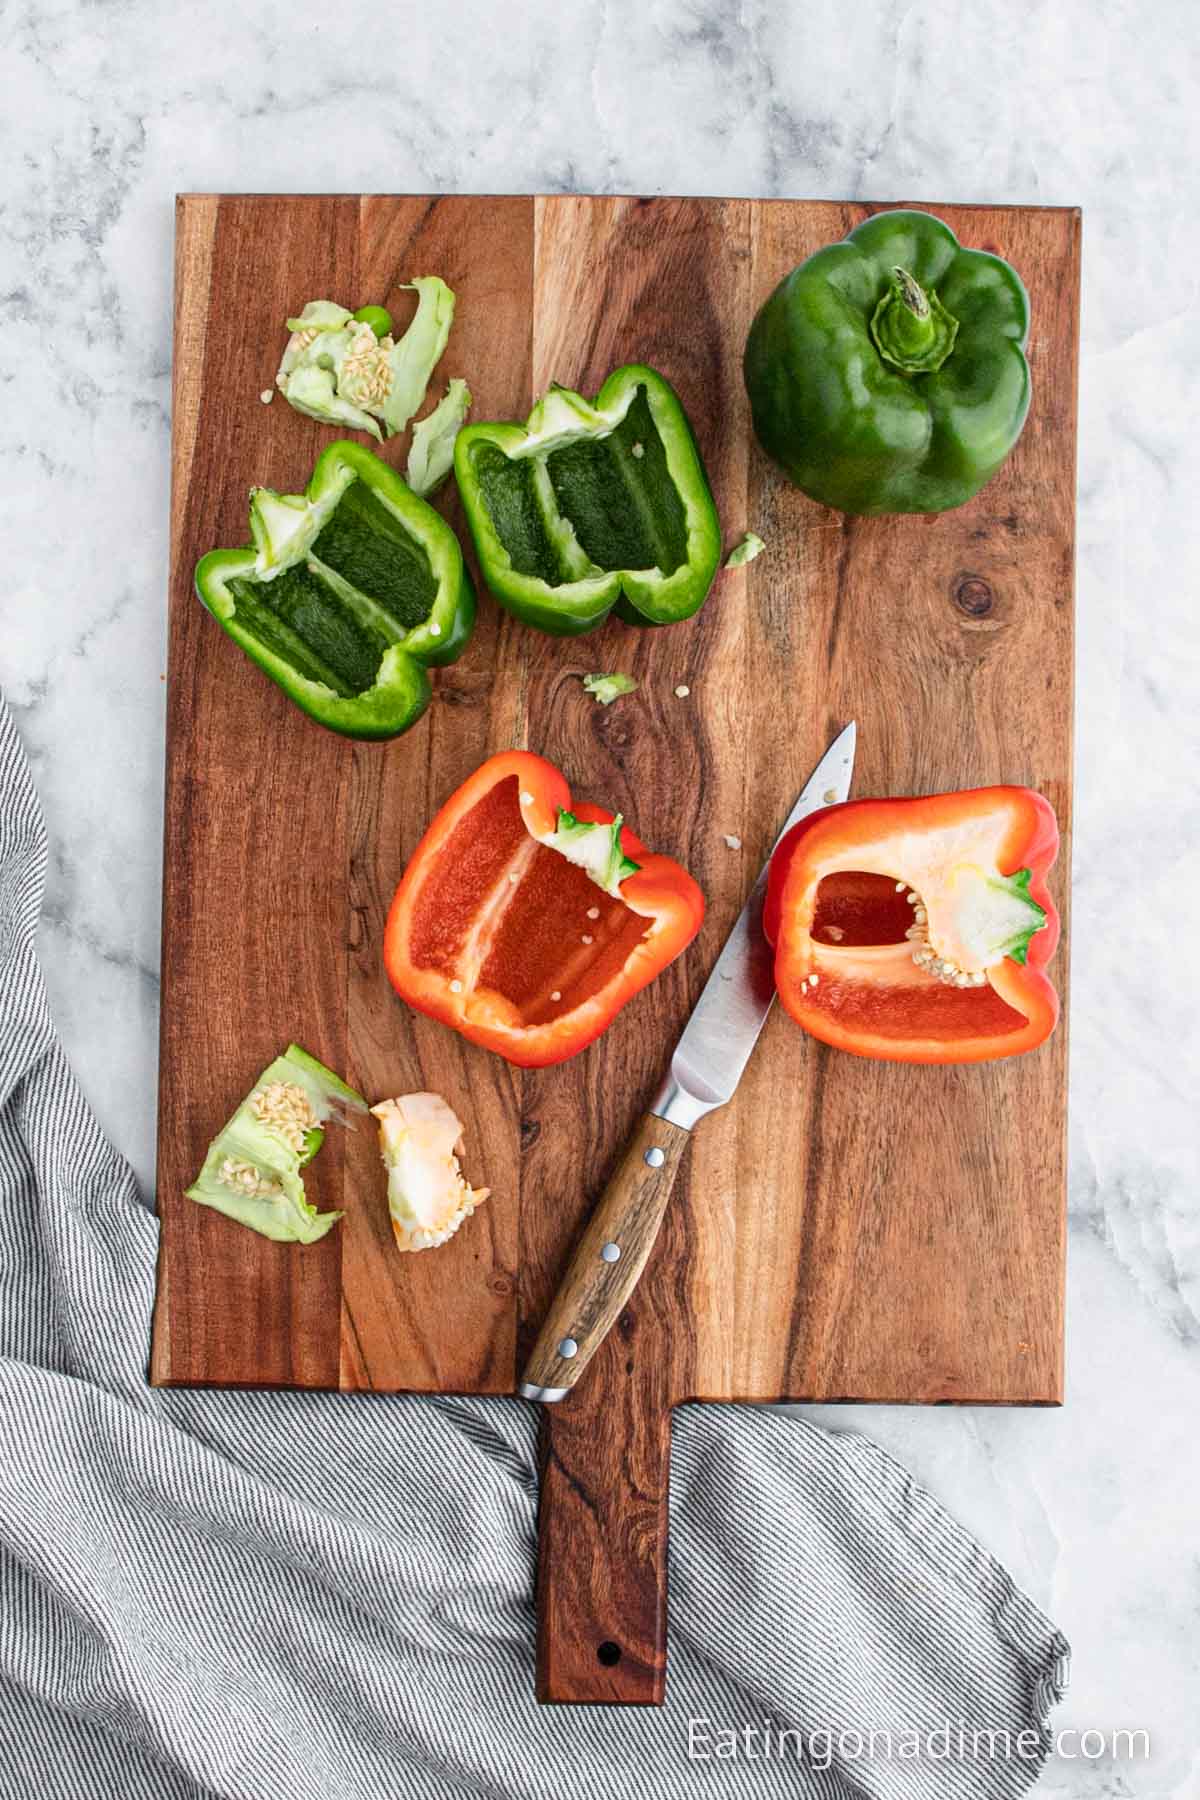 Preparing the peppers on a cutting board